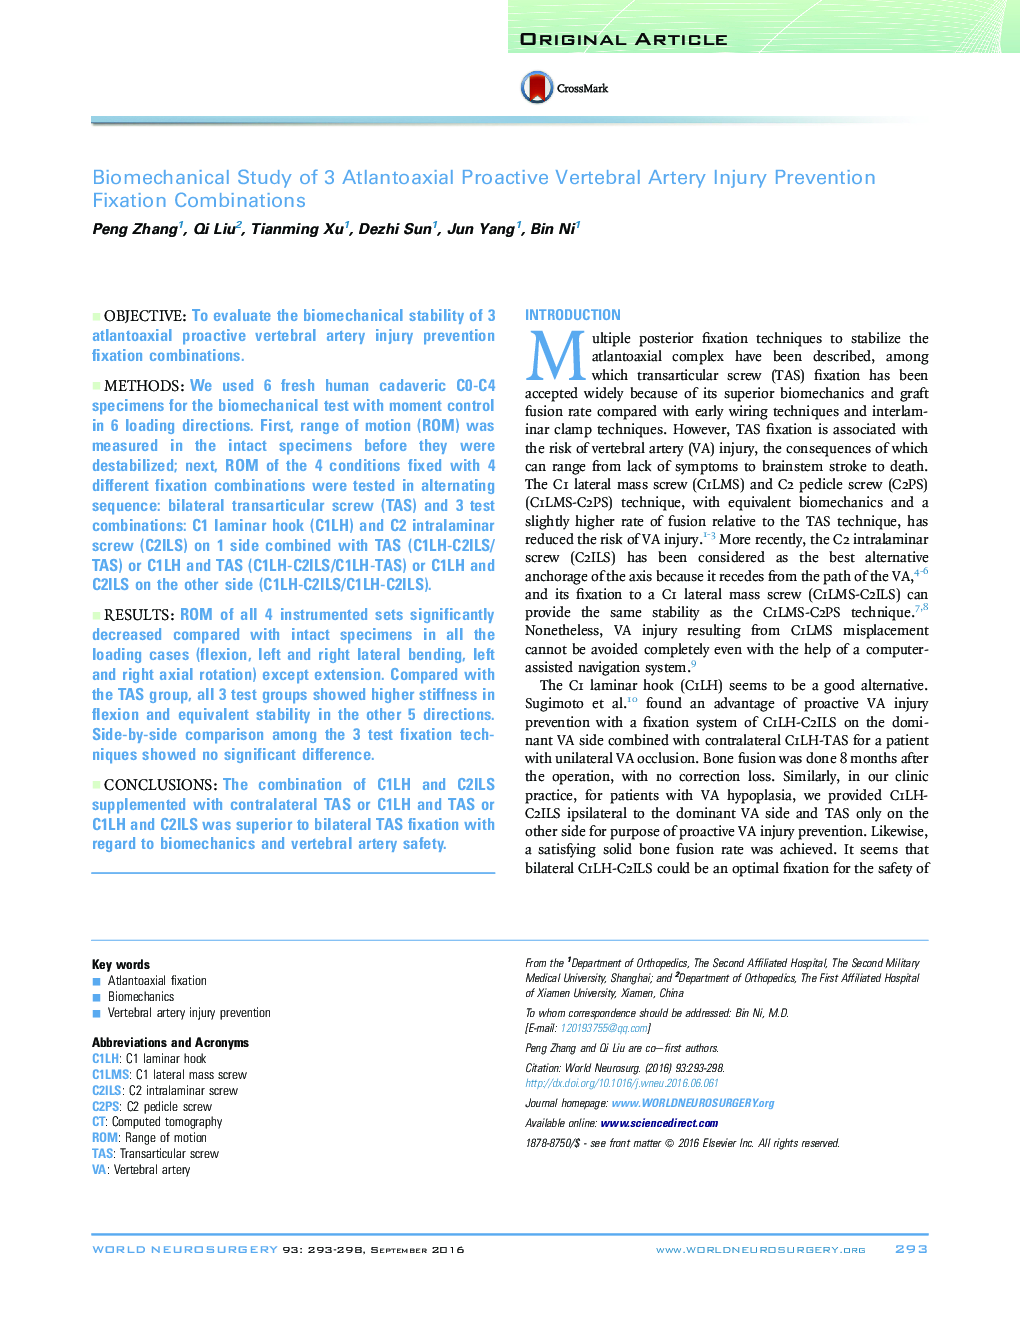 Original ArticleBiomechanical Study of 3 Atlantoaxial Proactive Vertebral Artery Injury Prevention Fixation Combinations